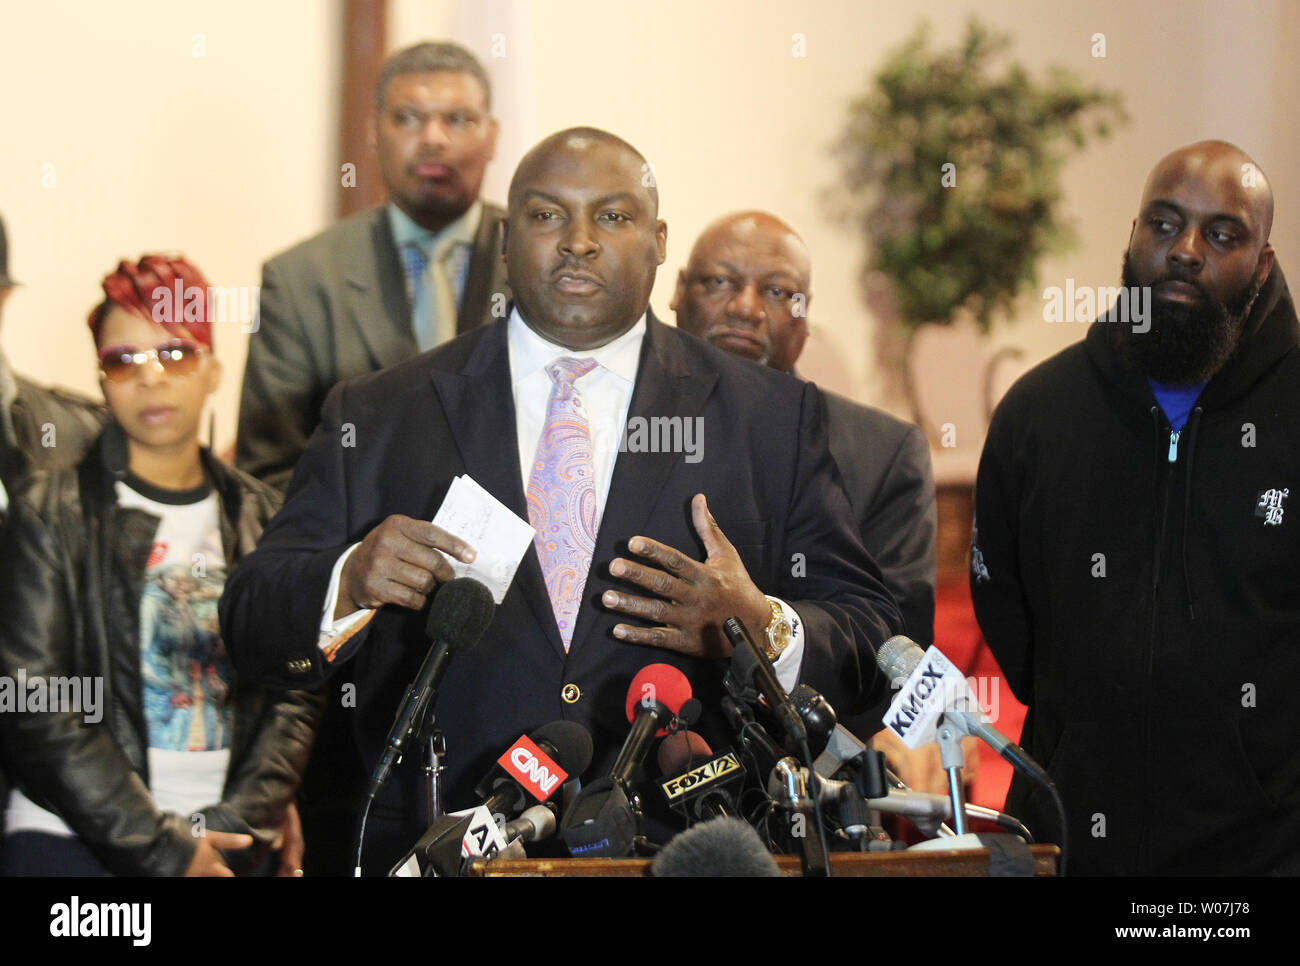 Lesley McSpadden, (L) and Michael Brown senior (R) the parents of Michael Brown, listen as family attorney Daryl Parks announce they plan to file a wrongful death lawsuit against the City of Ferguson and former Ferguson police officer Darren Wilson, in Ferguson,Missouri on March 5, 2015. The Department of Justice released their findings on March 4, 2015 saying no charges would be brought against Wilson for the shooting but was critical of the operations of the Ferguson Police Department.  Photo by Bill Greenblatt/UPI Stock Photo